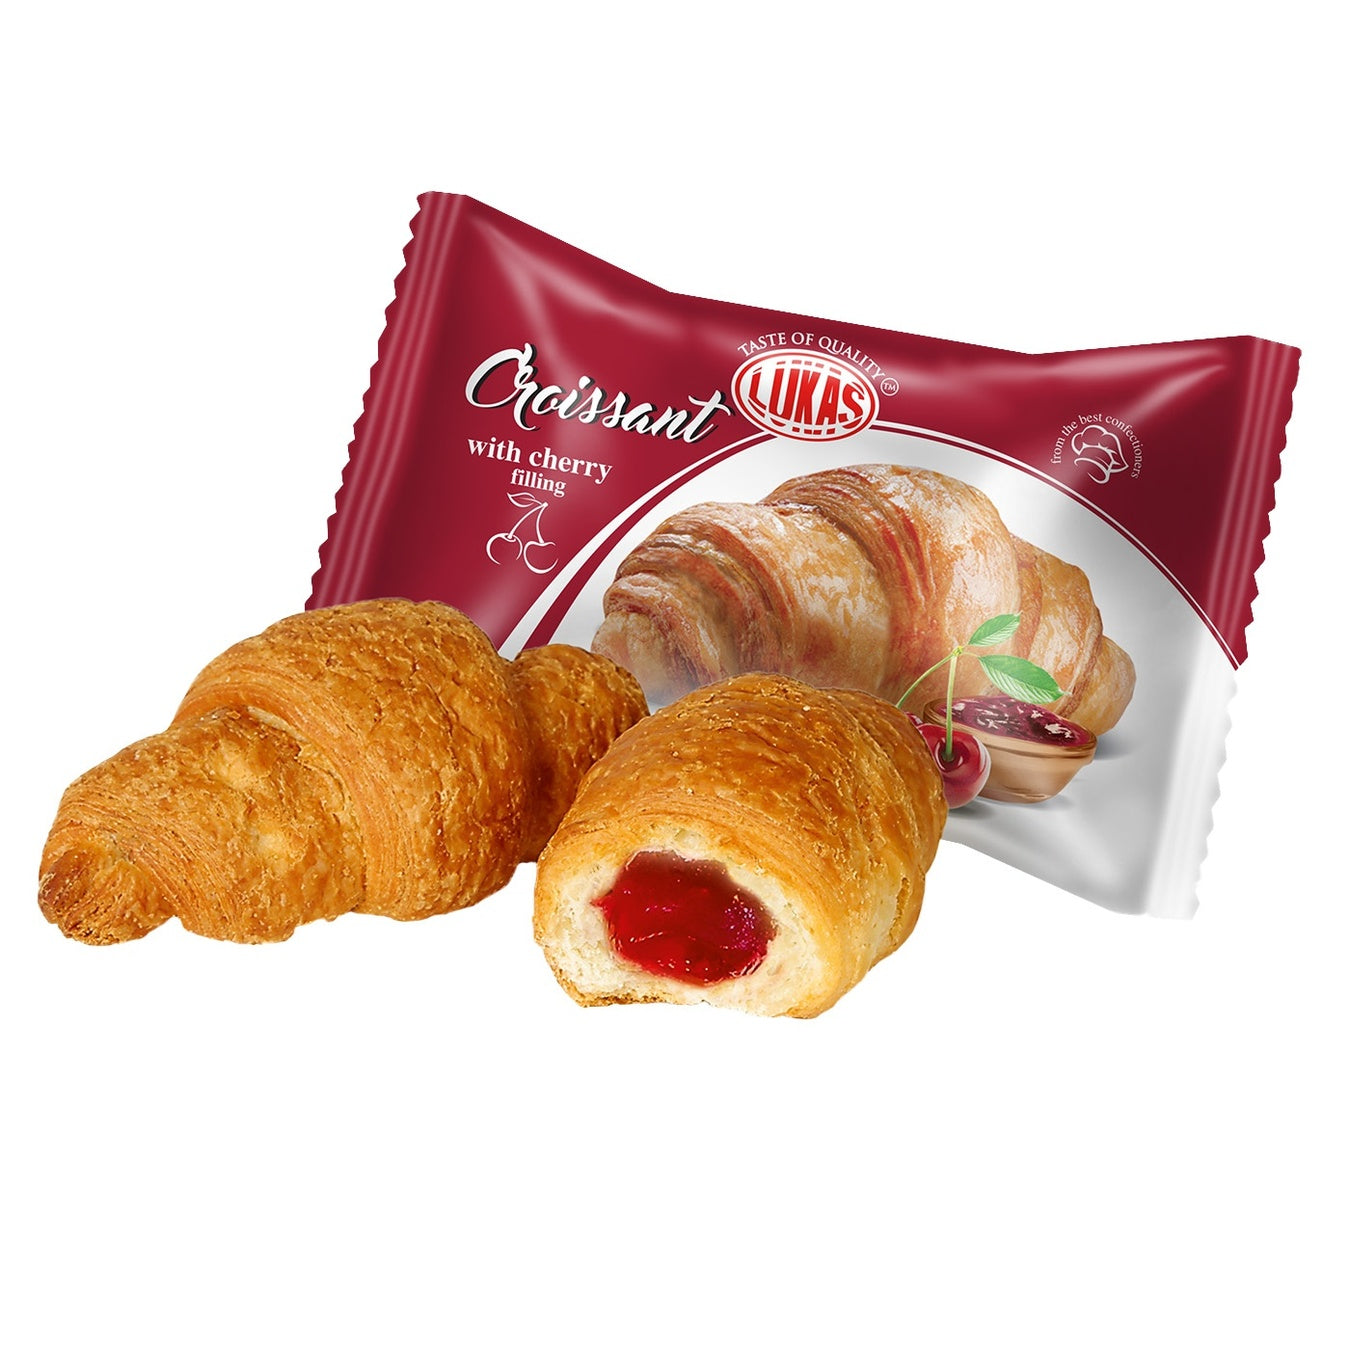 Lukas Croissant w/ Charry Filling, 45g